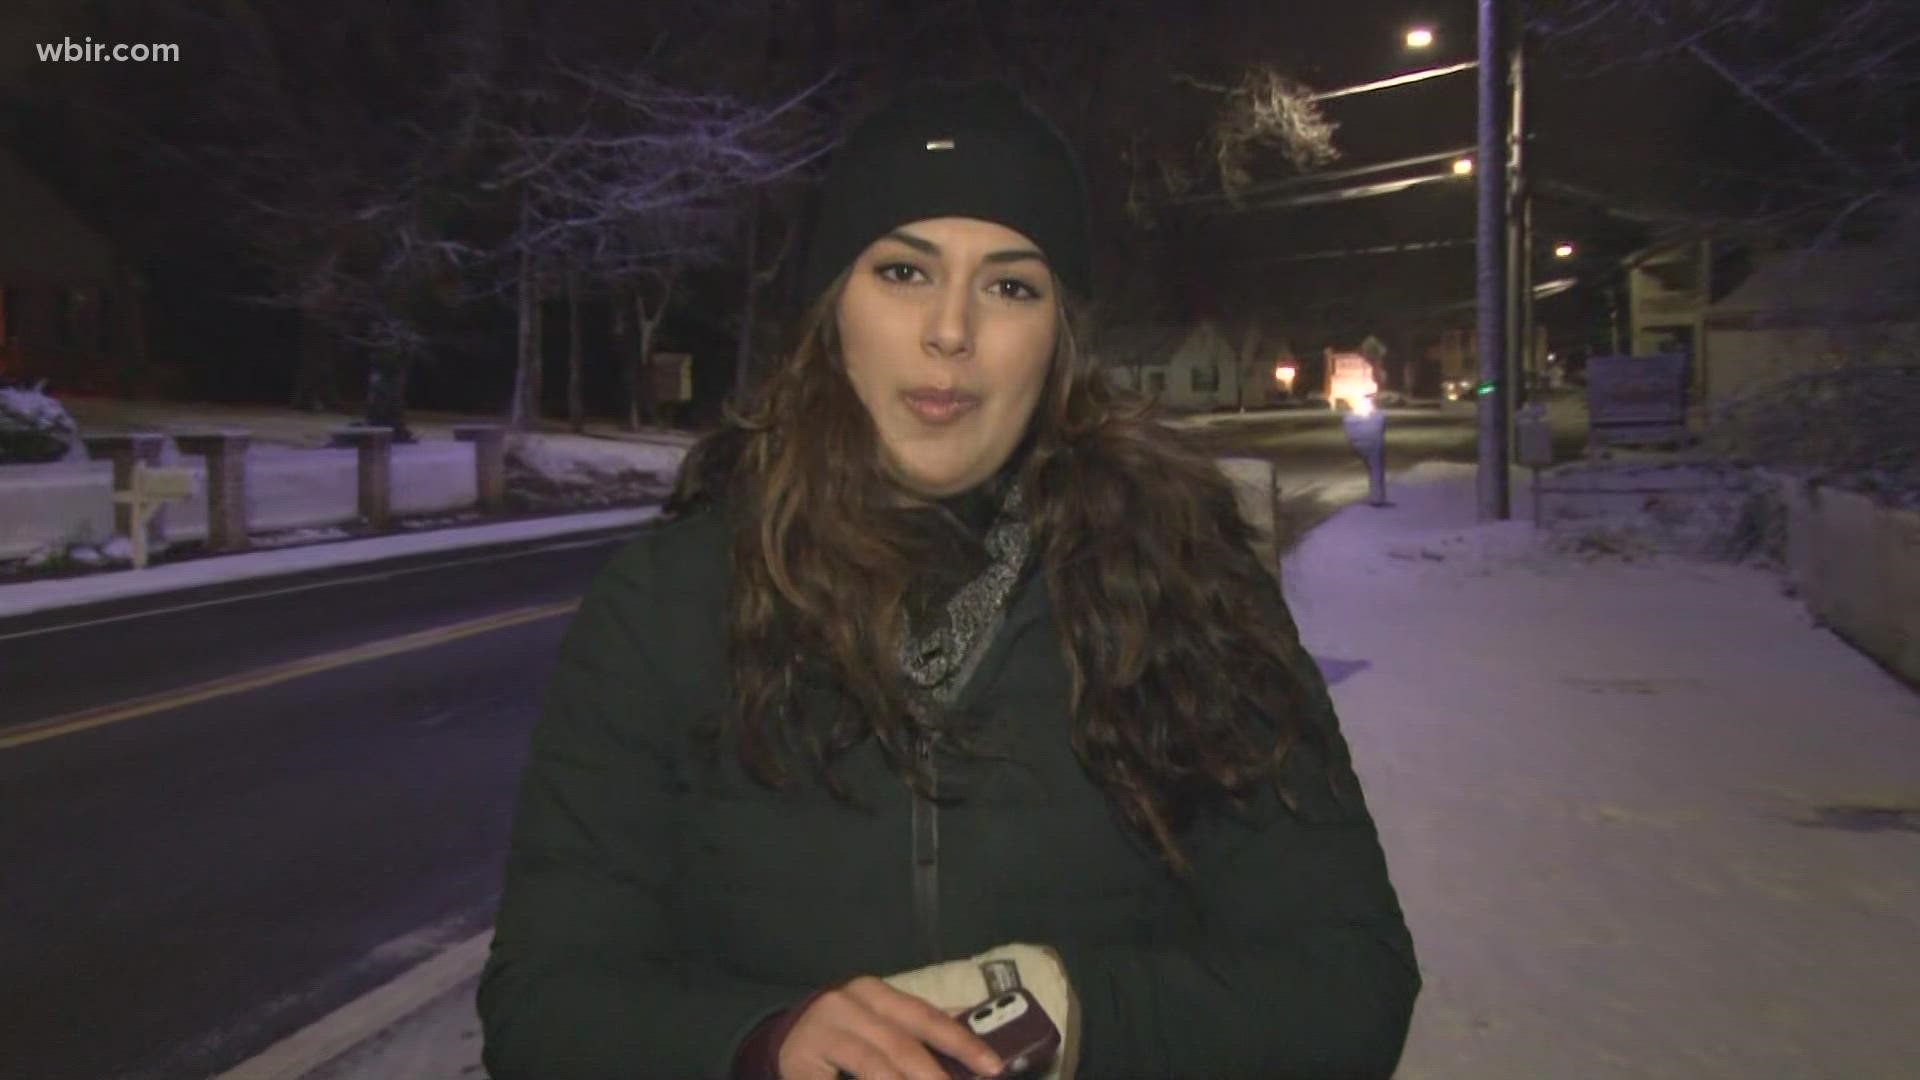 10News Reporter Raya Quttaineh gives an update on the road conditions from Blount County.